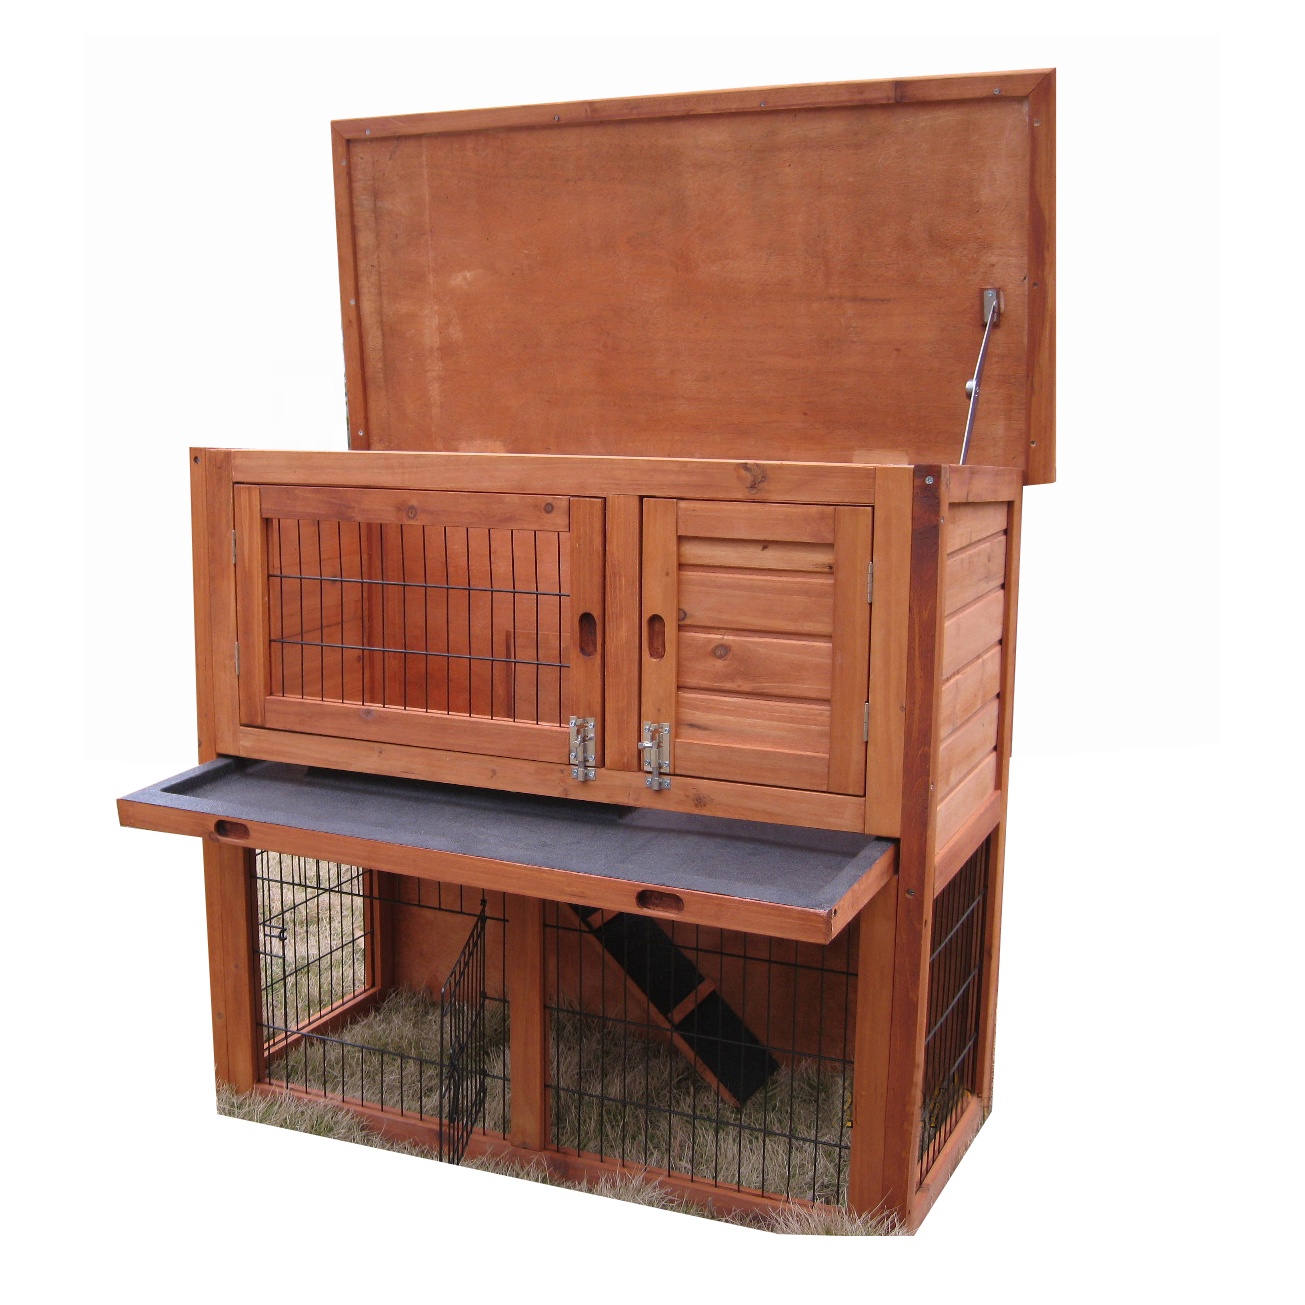 China New Product Incubating Duck Eggs -
 Factory Outdoor Wooden Indoor Rabbit Hutch Elevated Cage Habitat with Enclosed Run Wheels Ideal Rabbits Guinea Pig home – Easy